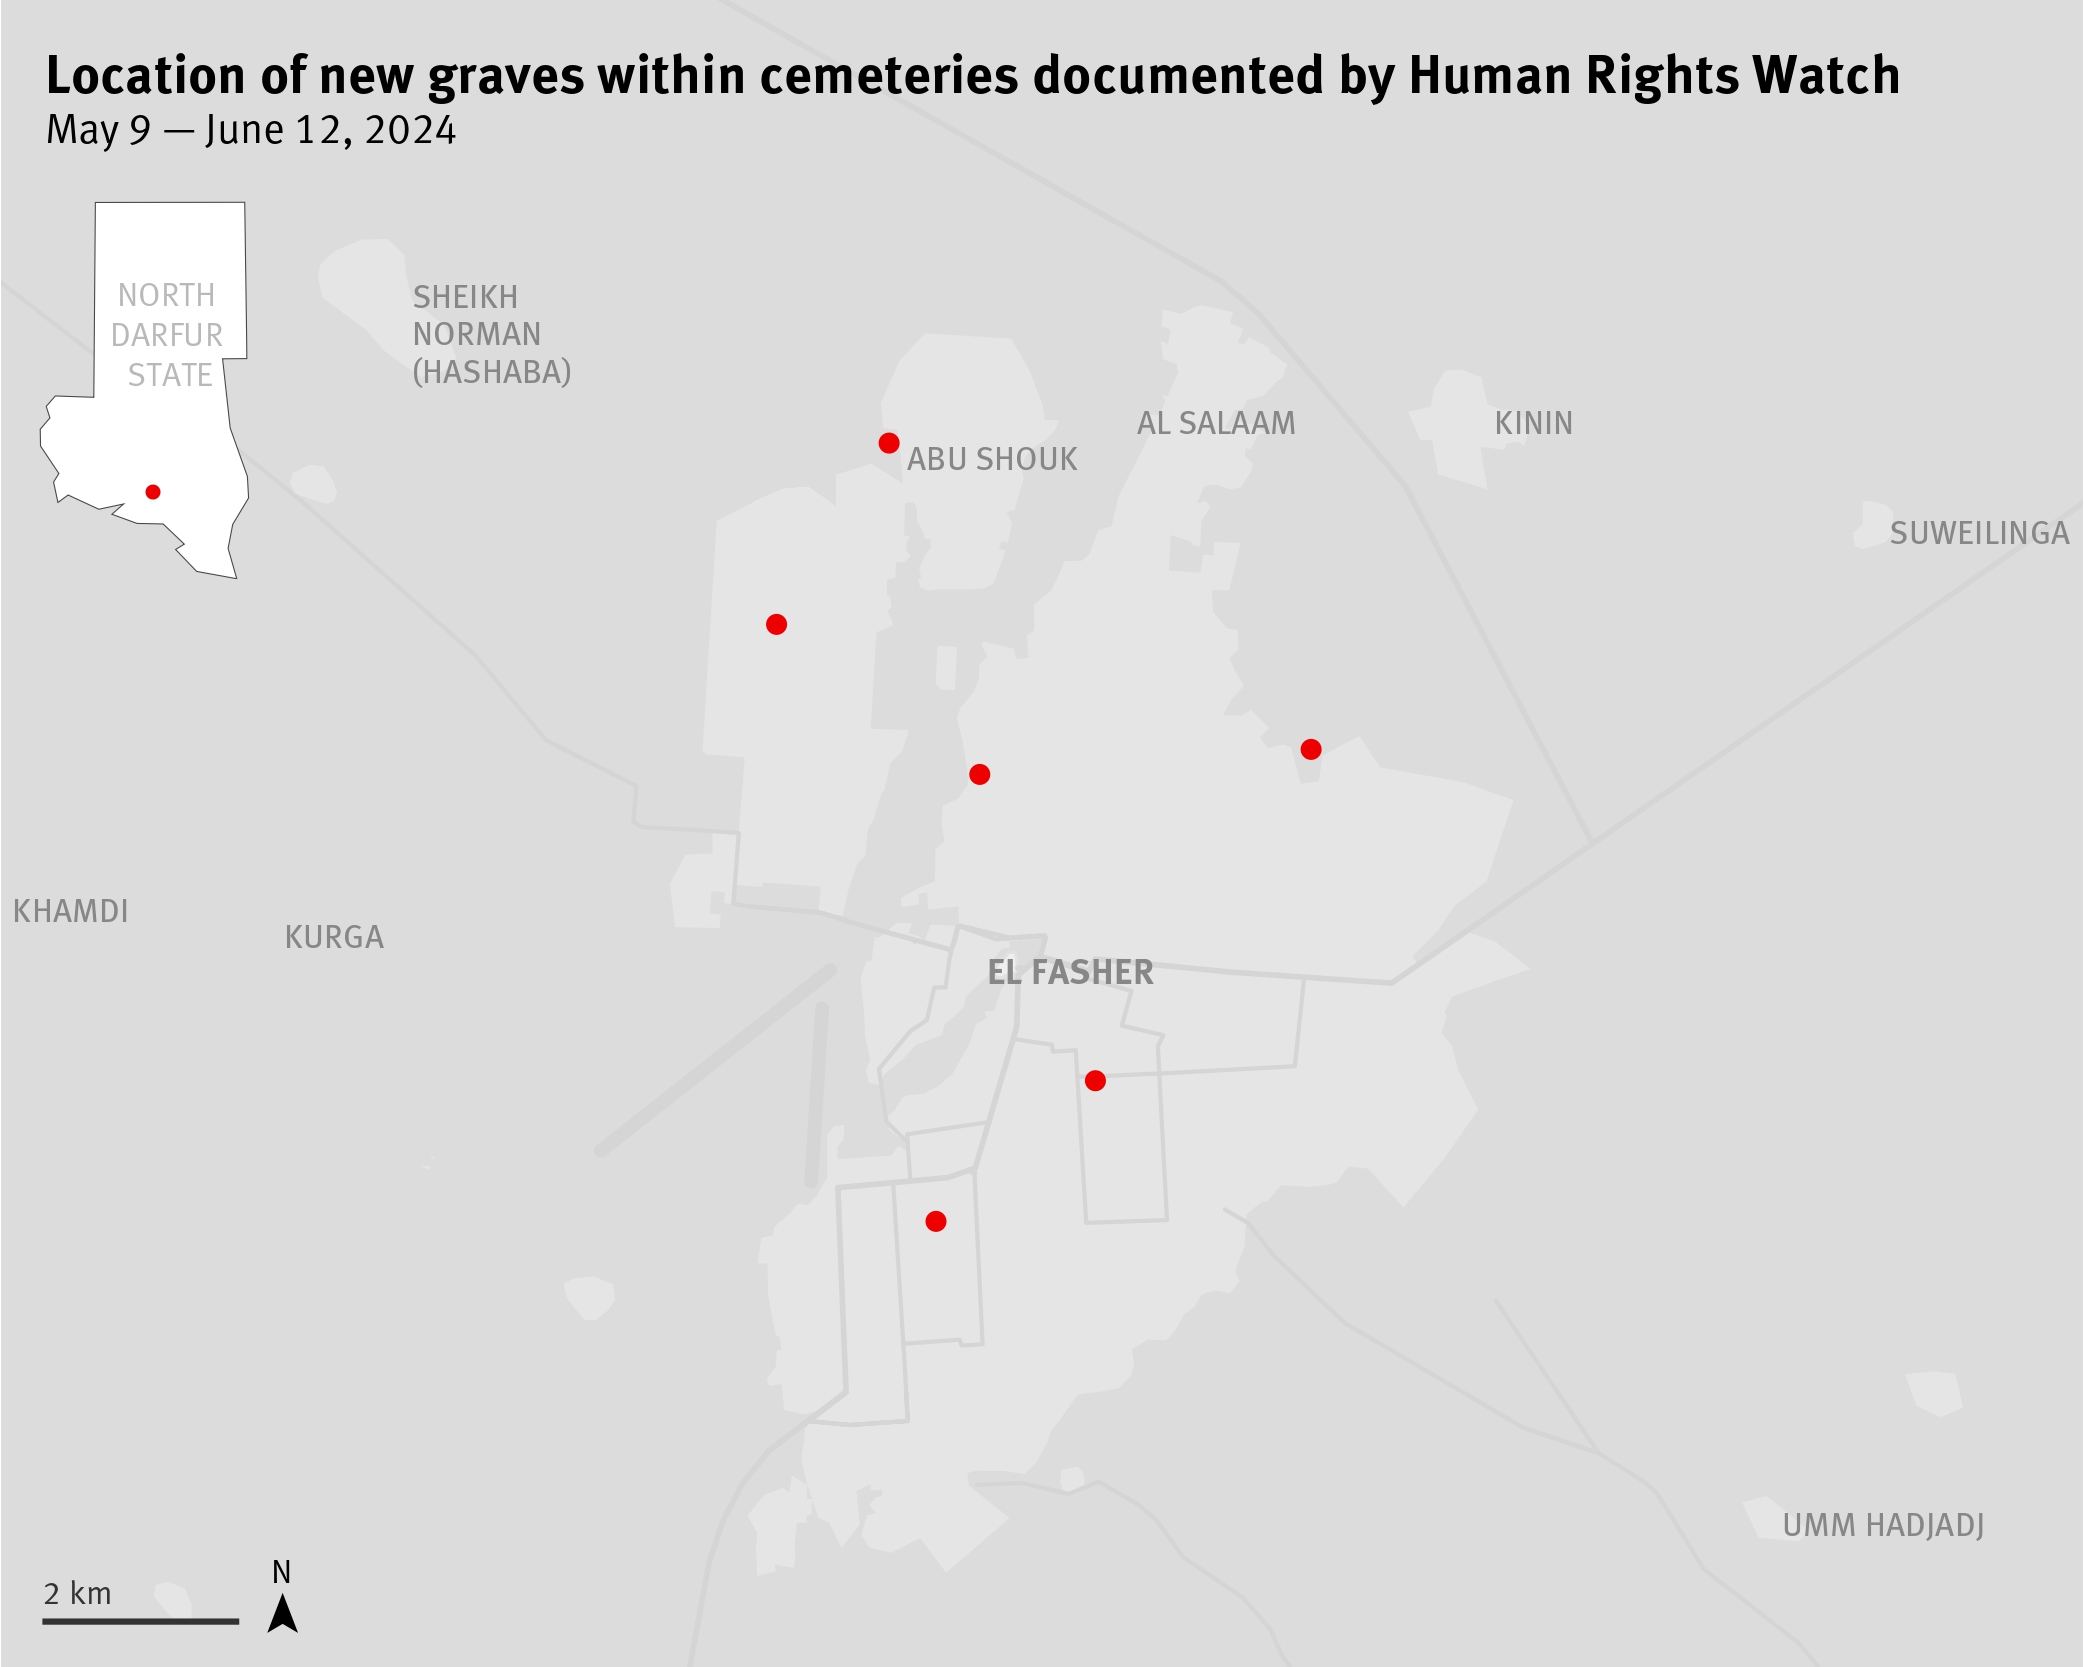 Location of new graves documented by Human Rights Watch from May 9 to June 12, 2024. 